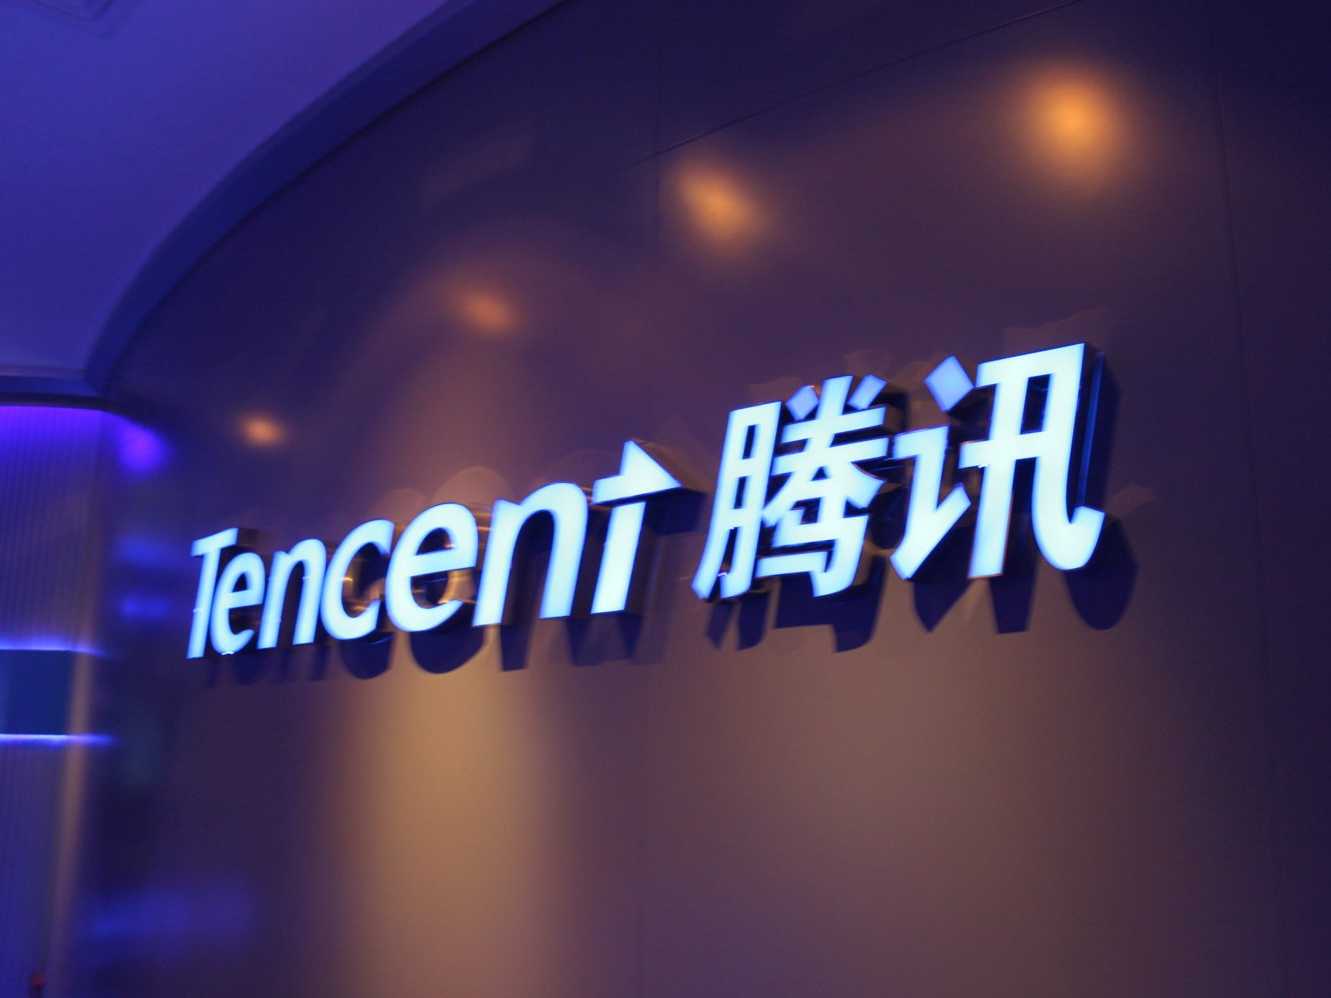 Tencent Games Logo - Tencent Games and SLIVER.tv Partner Up For New 24/7 Esports Channel ...